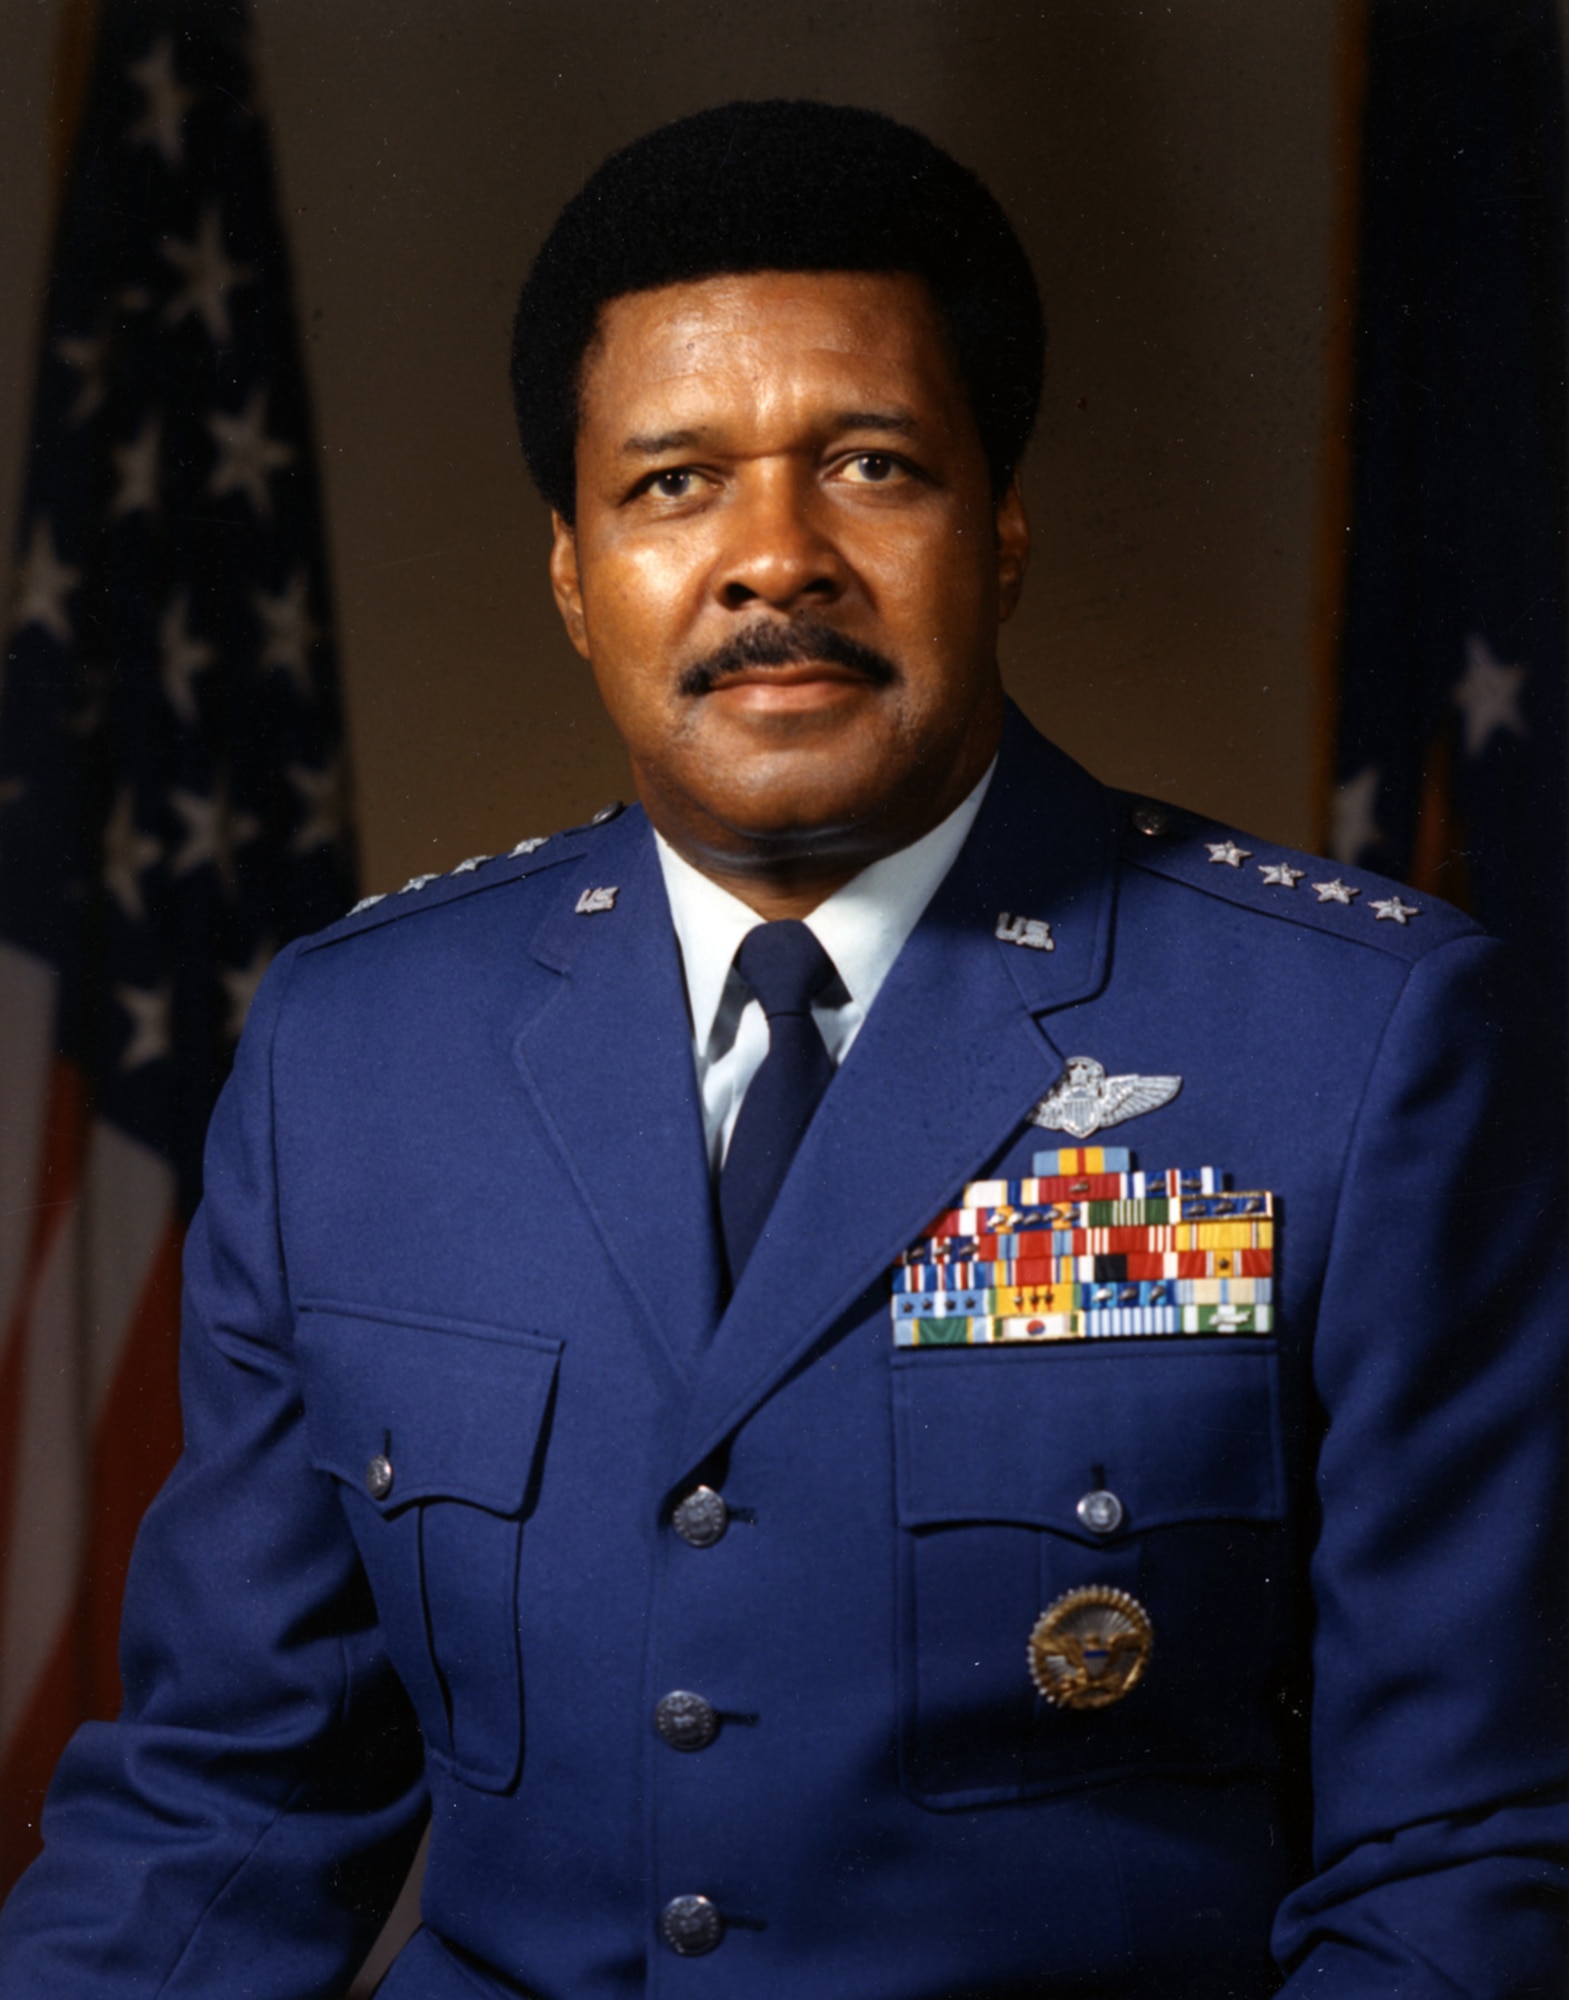 Daniel "Chappie" James Jr., the Air Force's first African-American four-star general